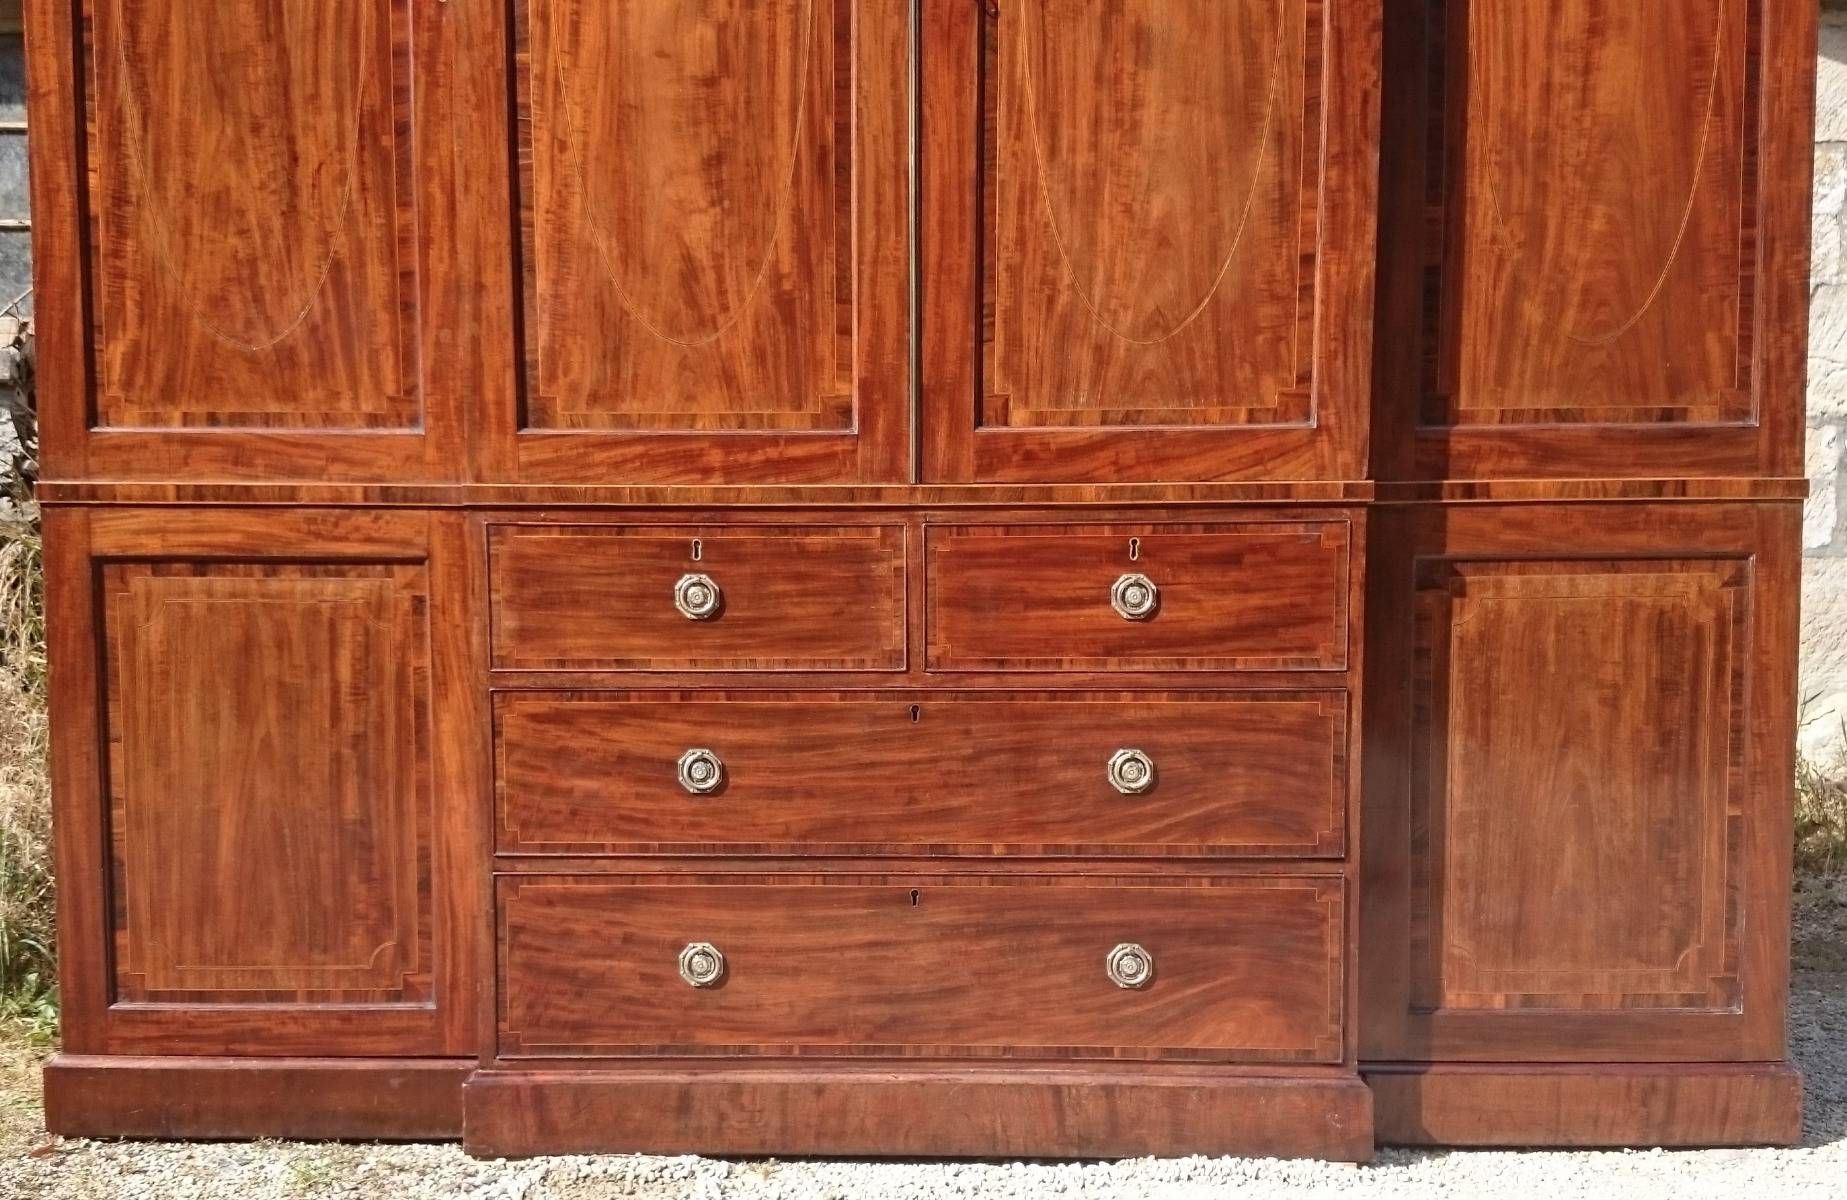 Antique Wardrobe & Linen Presses – Hares Antiques Intended For Antique Breakfront Wardrobe (View 10 of 30)